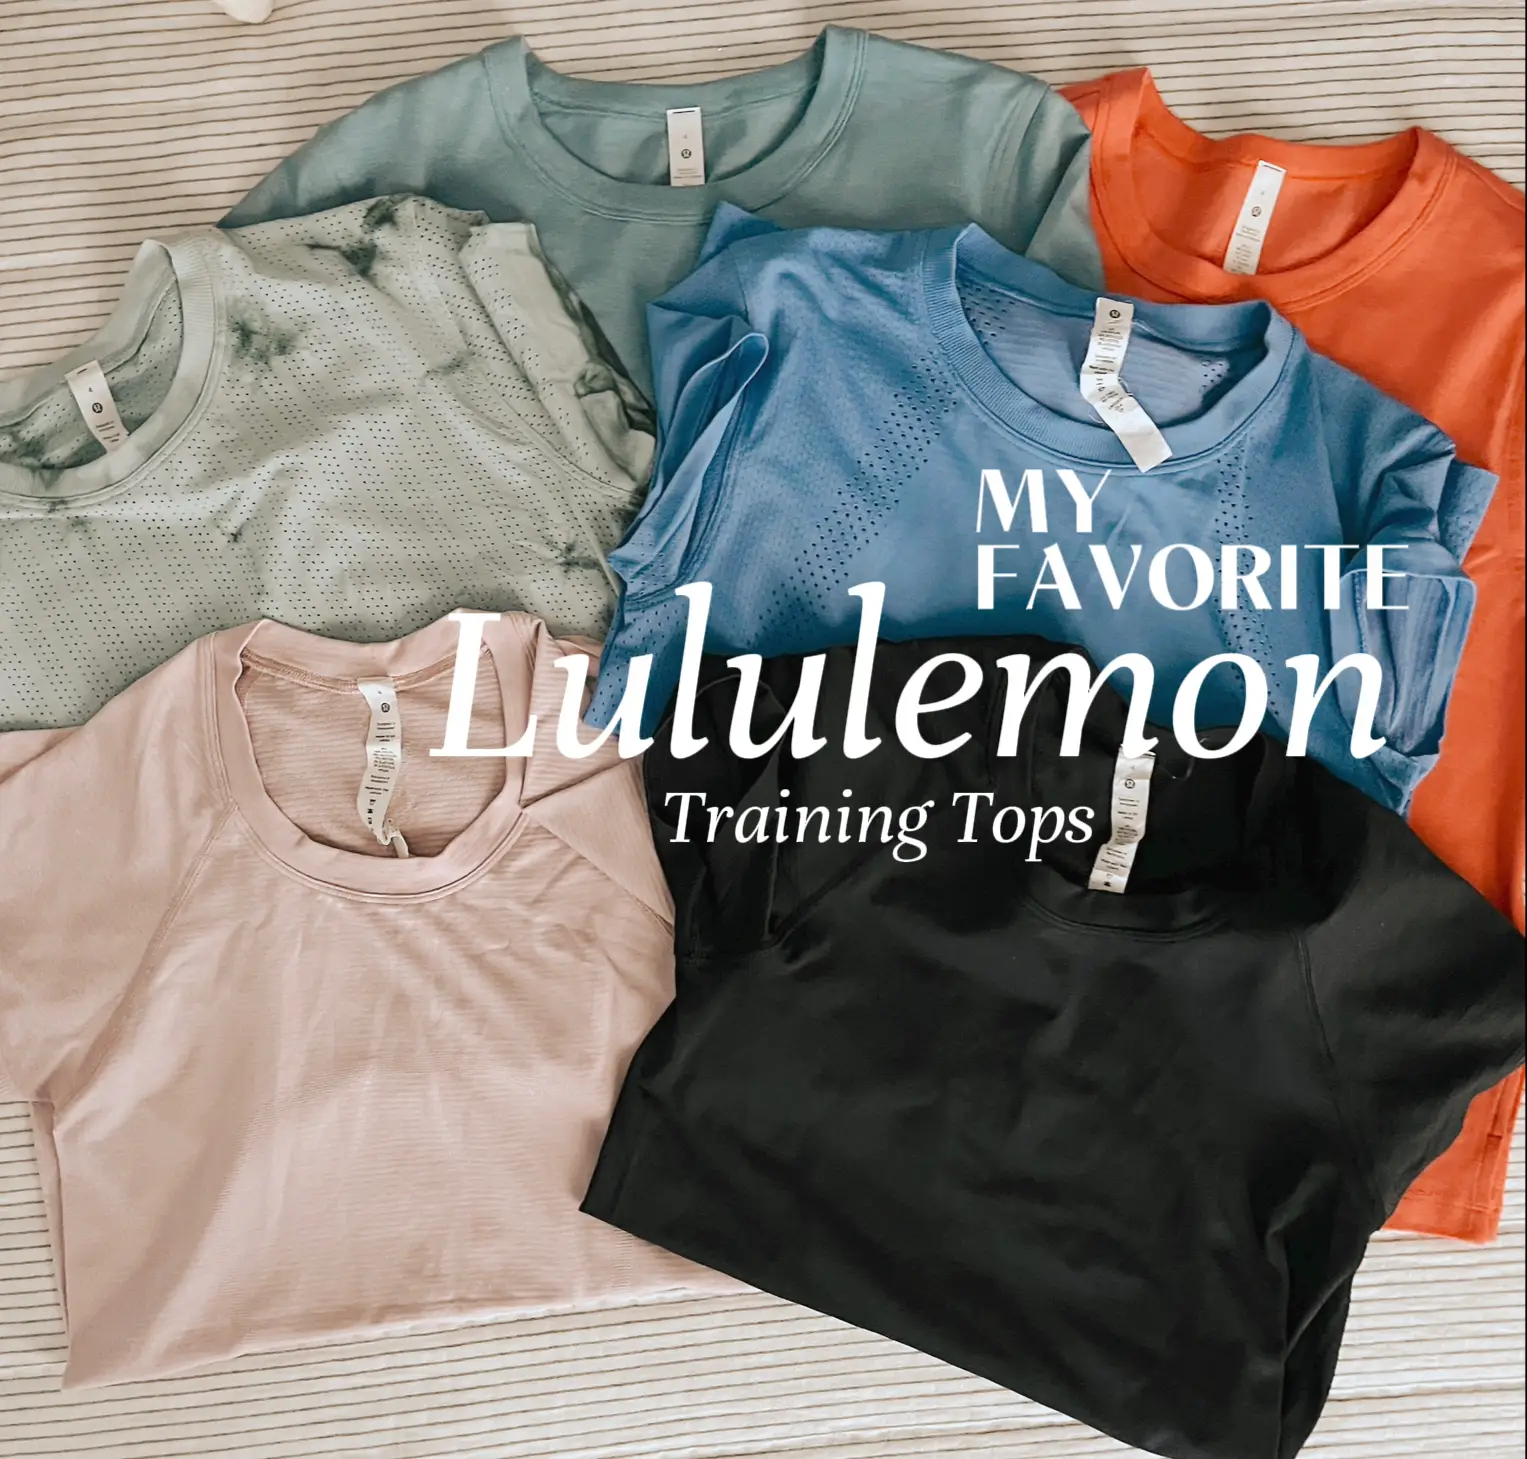 Tidewater Teal Wunder Under 25” Full On Luxtreme Review : r/lululemon